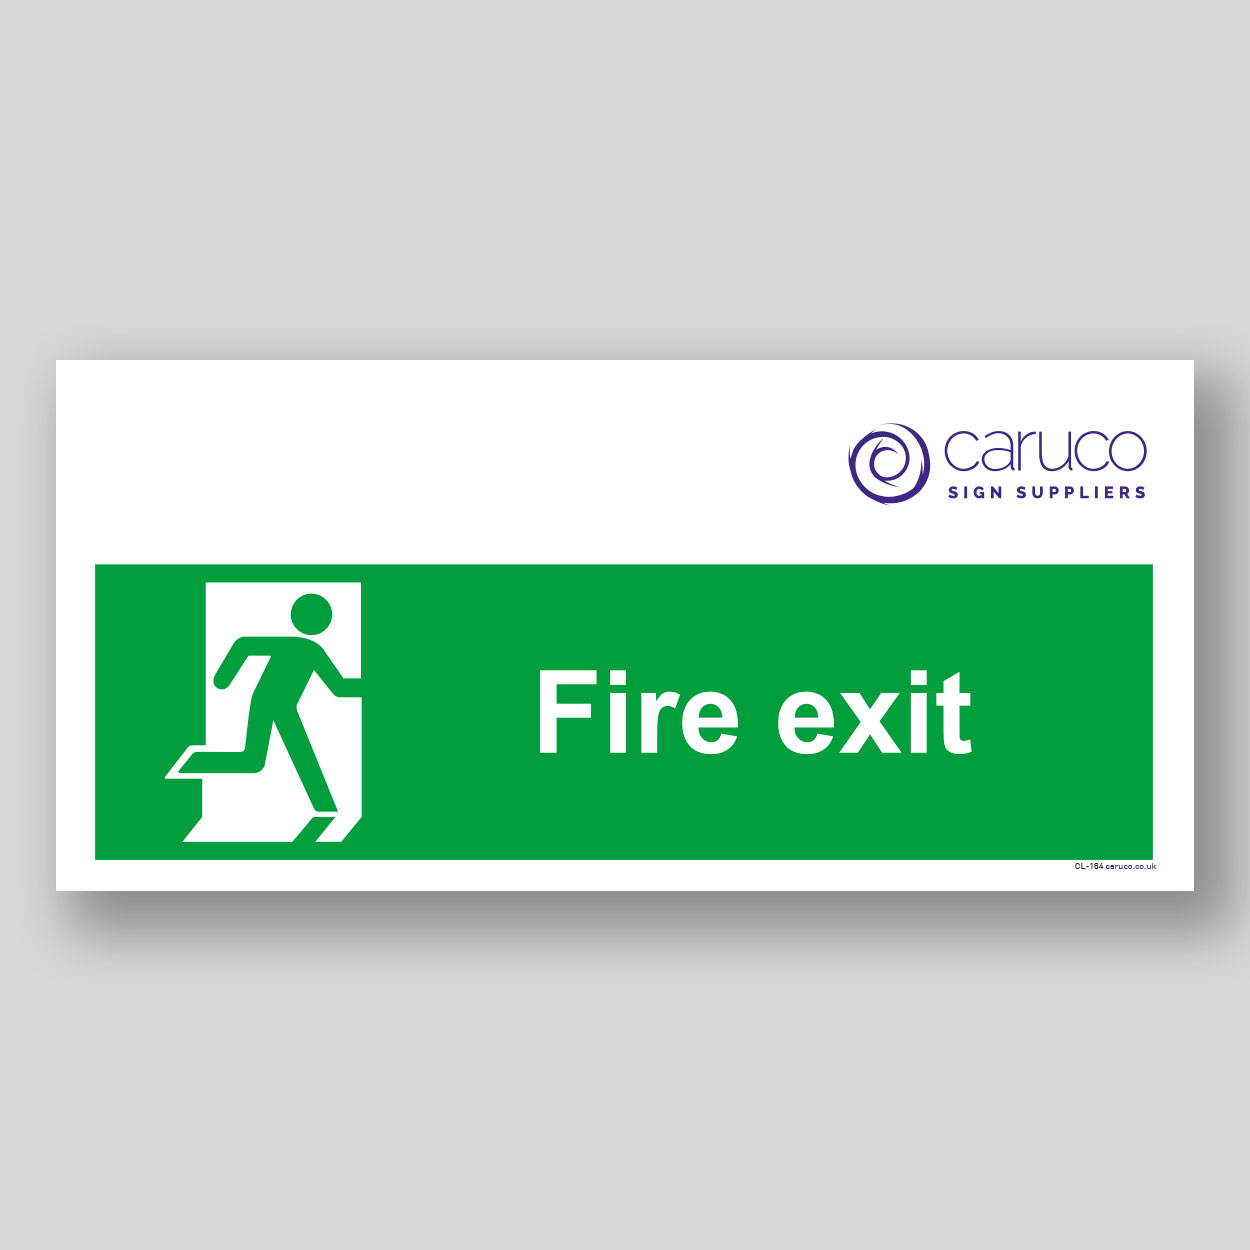 CL-184 Fire exit - with man left